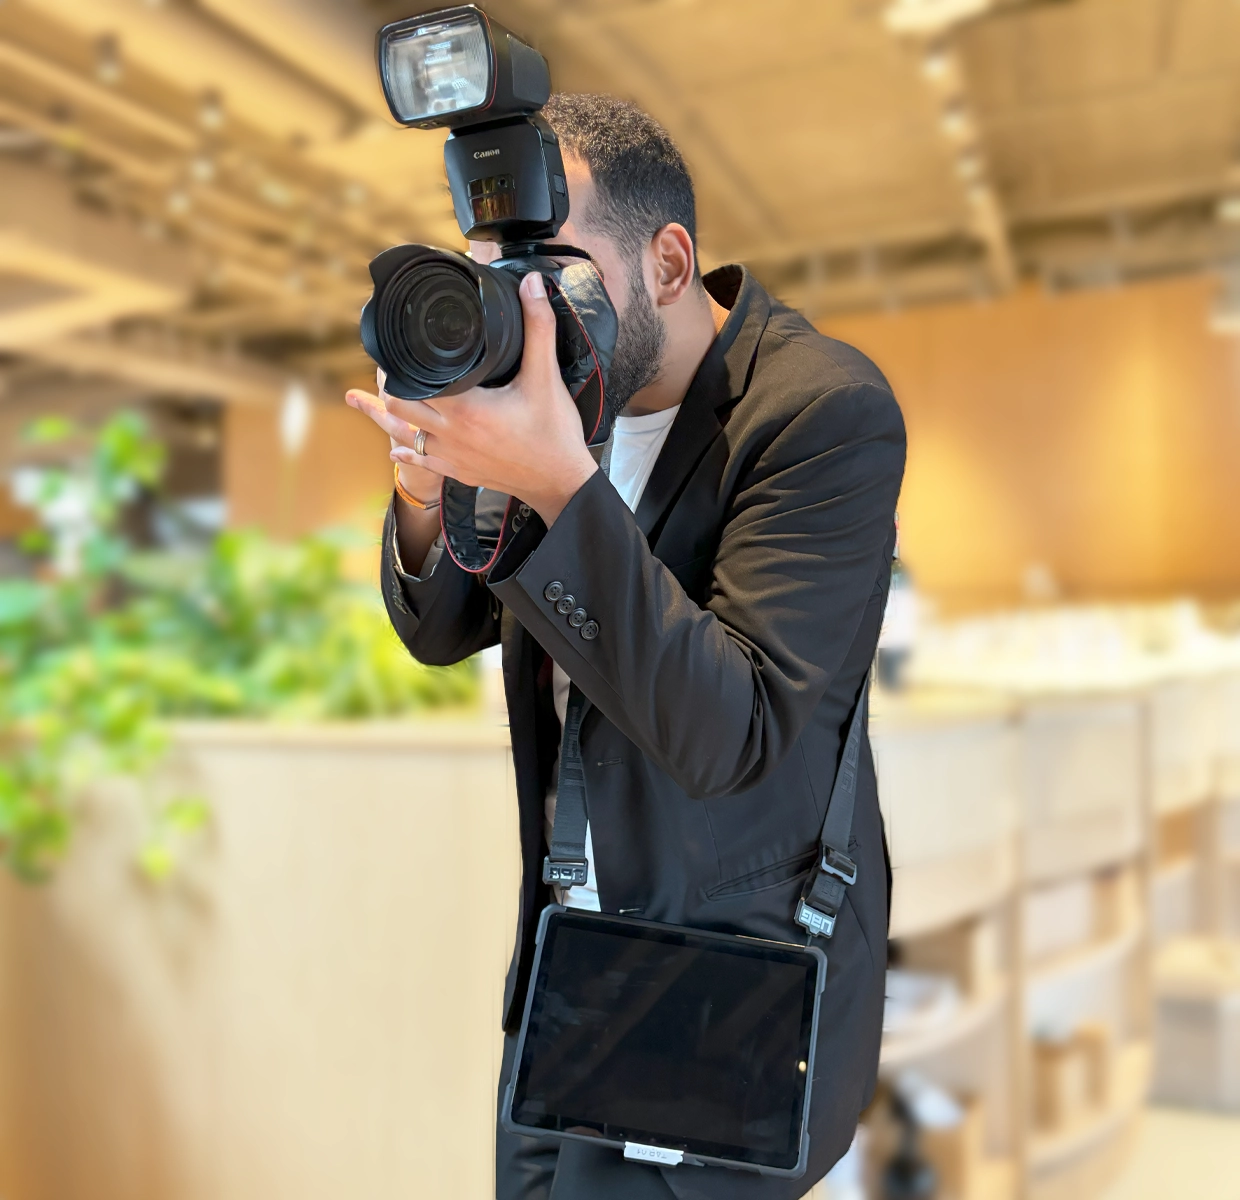 A focused photographer captures moments at a social event, equipped with a professional DSLR camera and portable printing station.